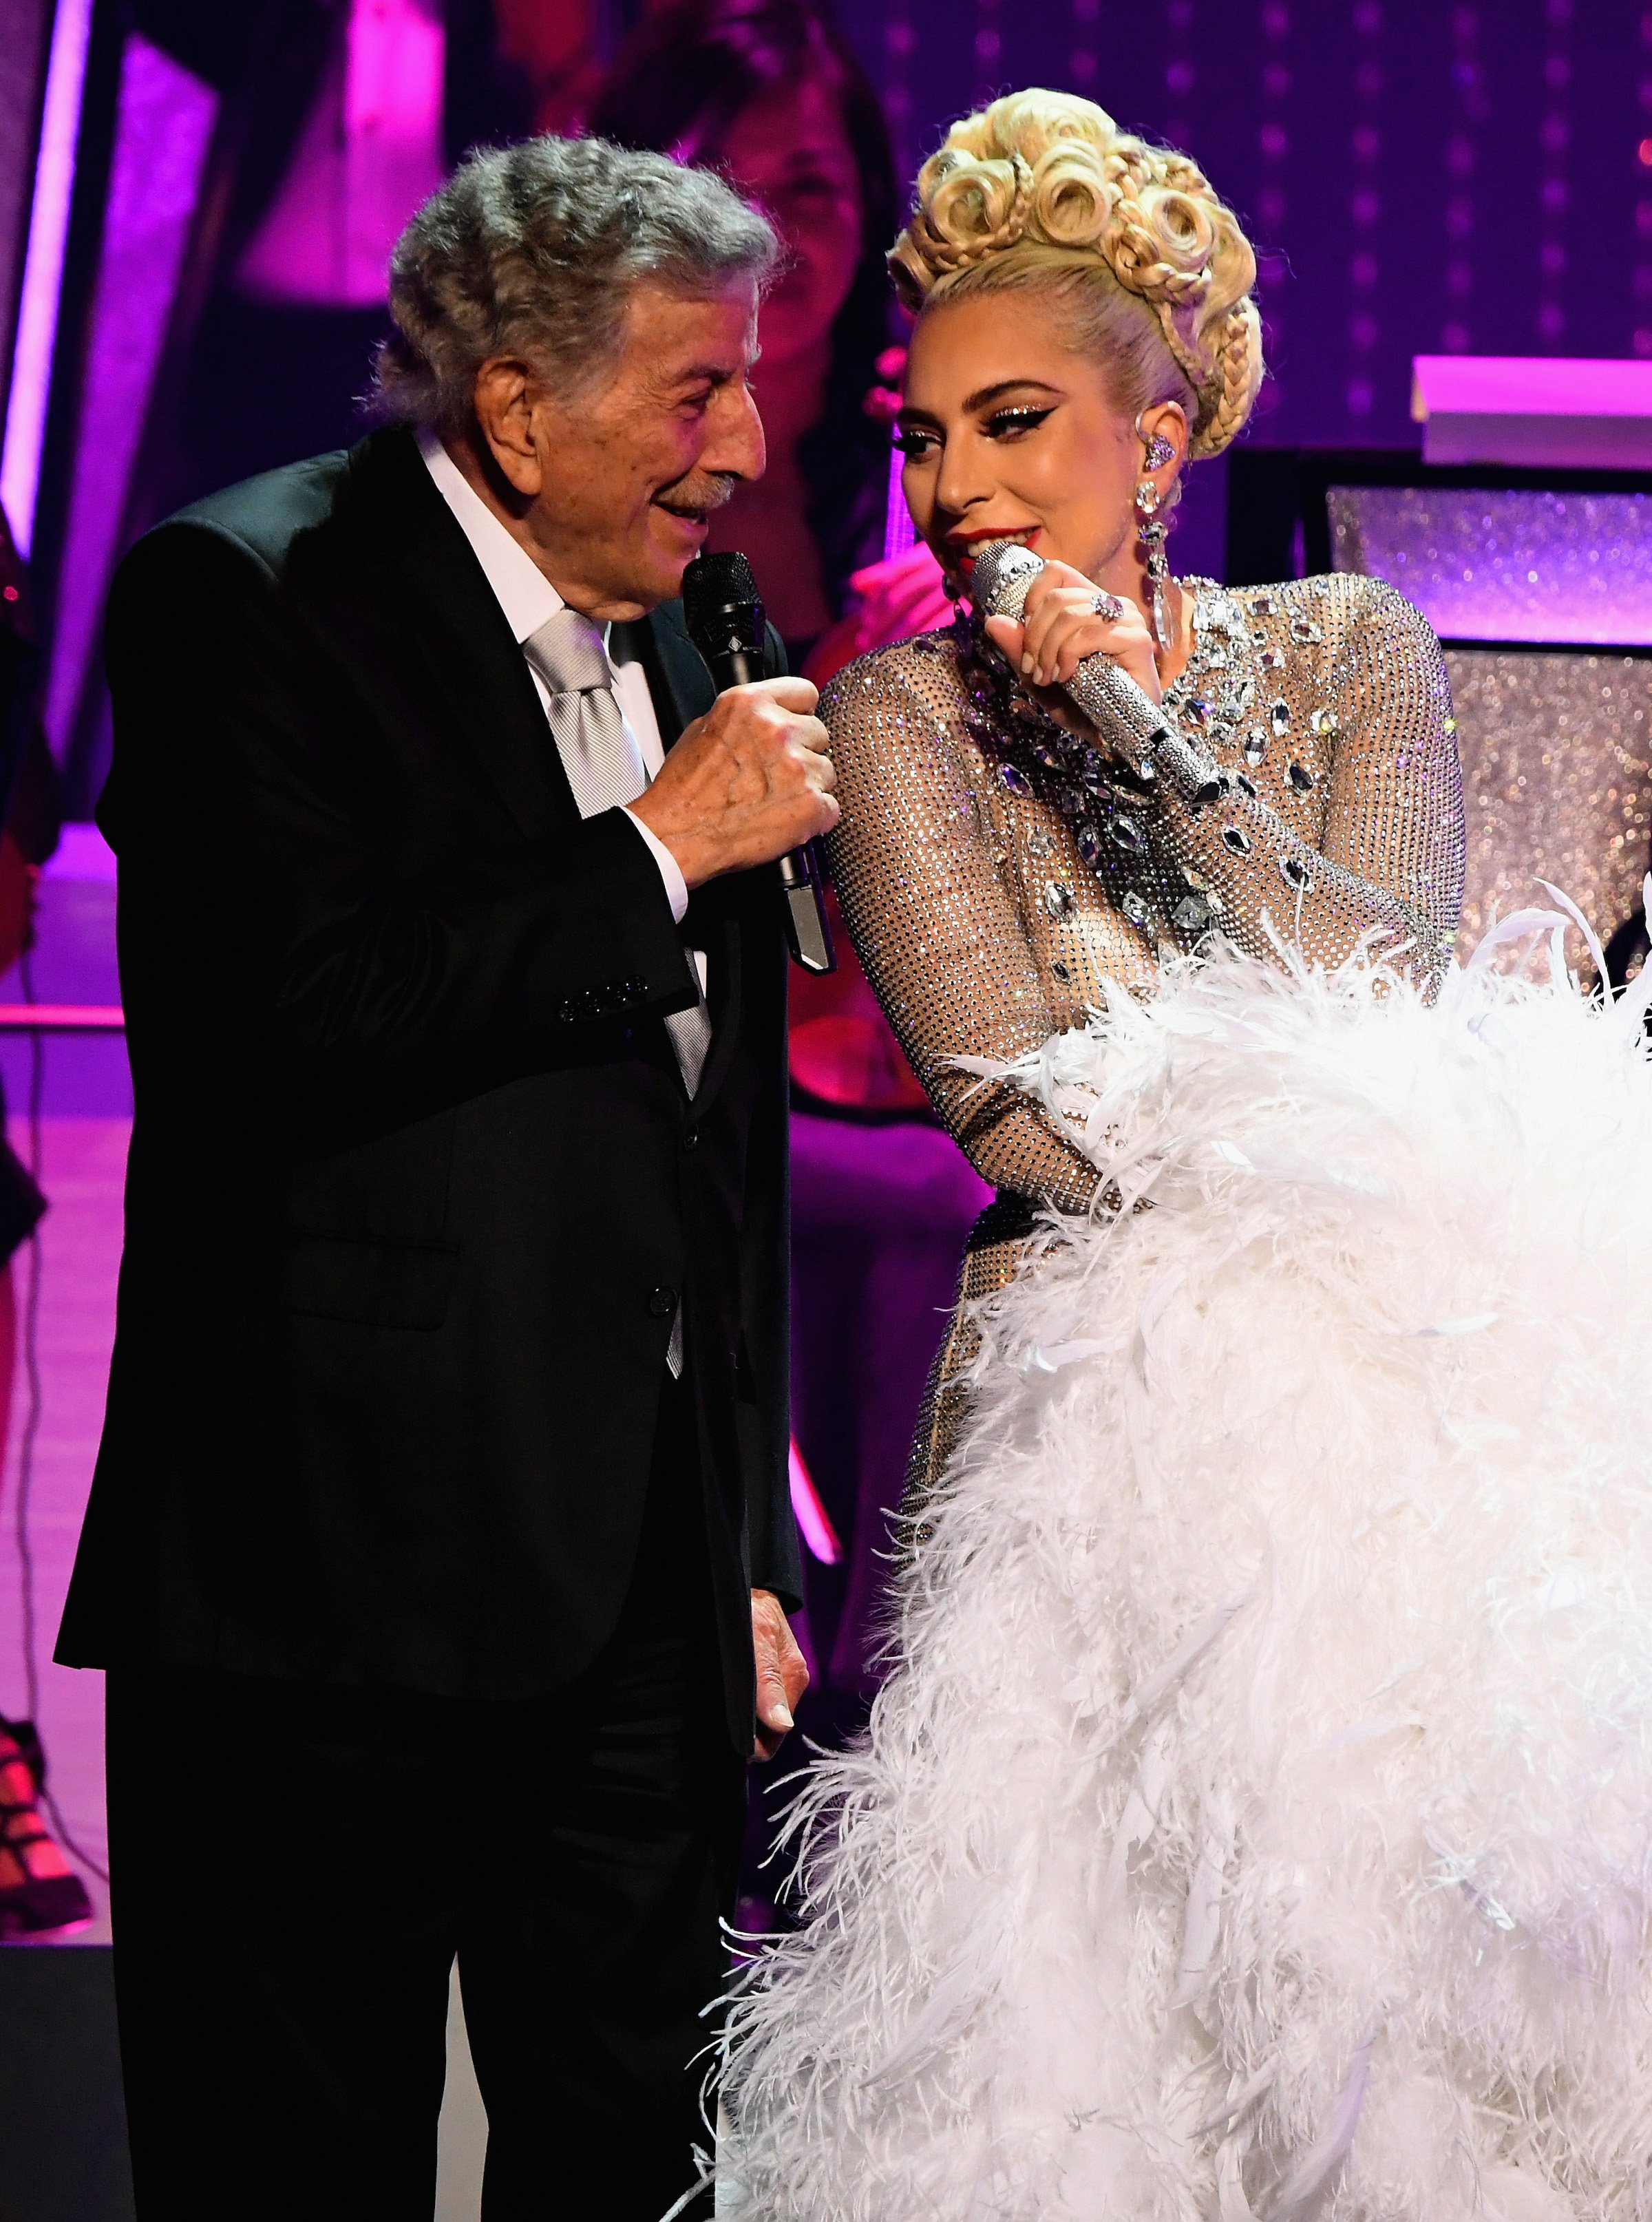 Lady Gaga and Tony Bennett performing together